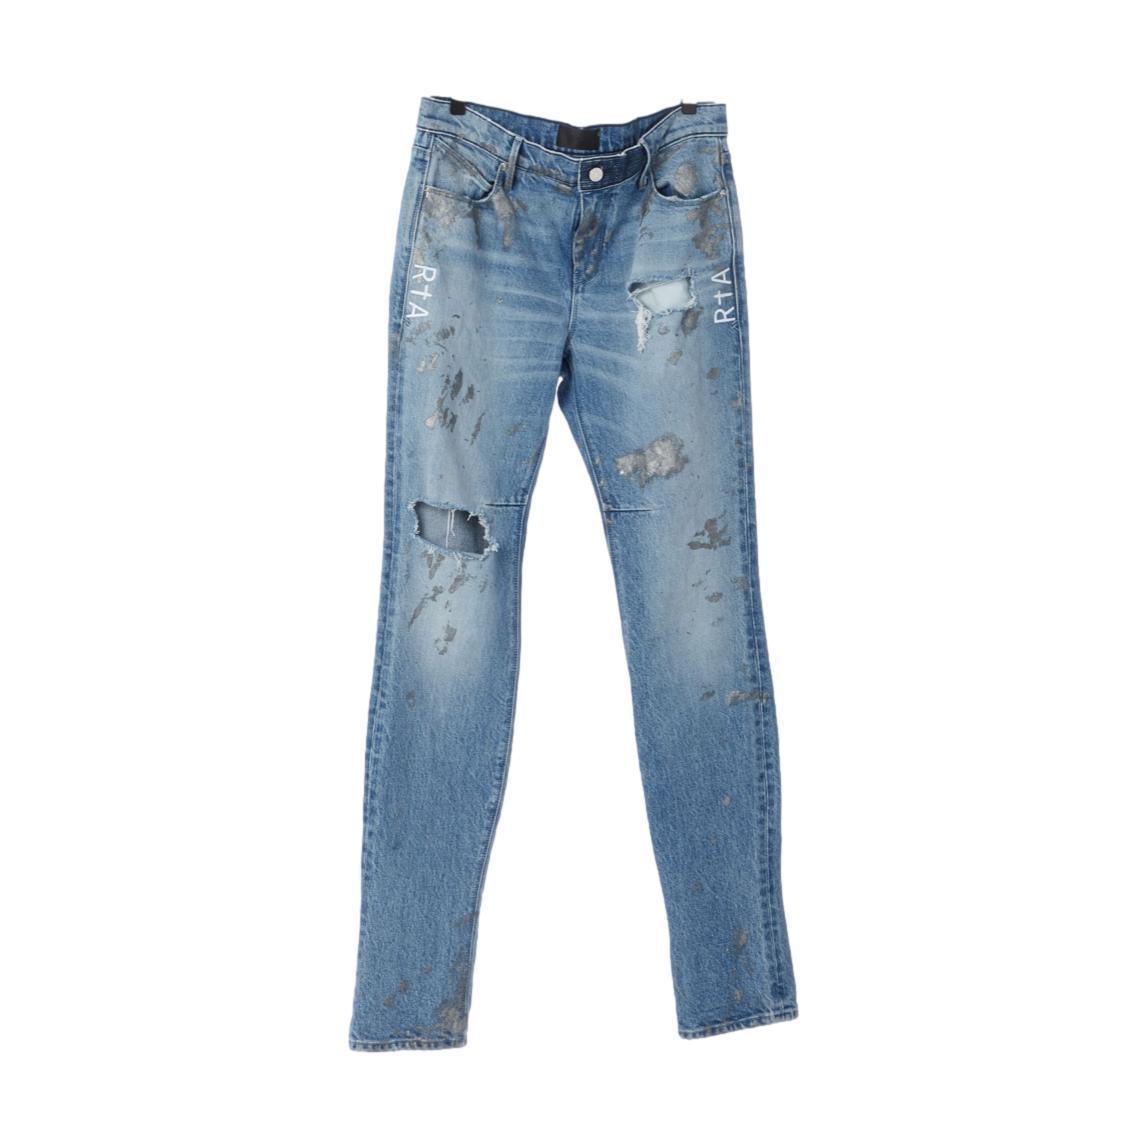 RTA BRYANT MID BLUE SILVER PAINT JEANS - Gravity NYC